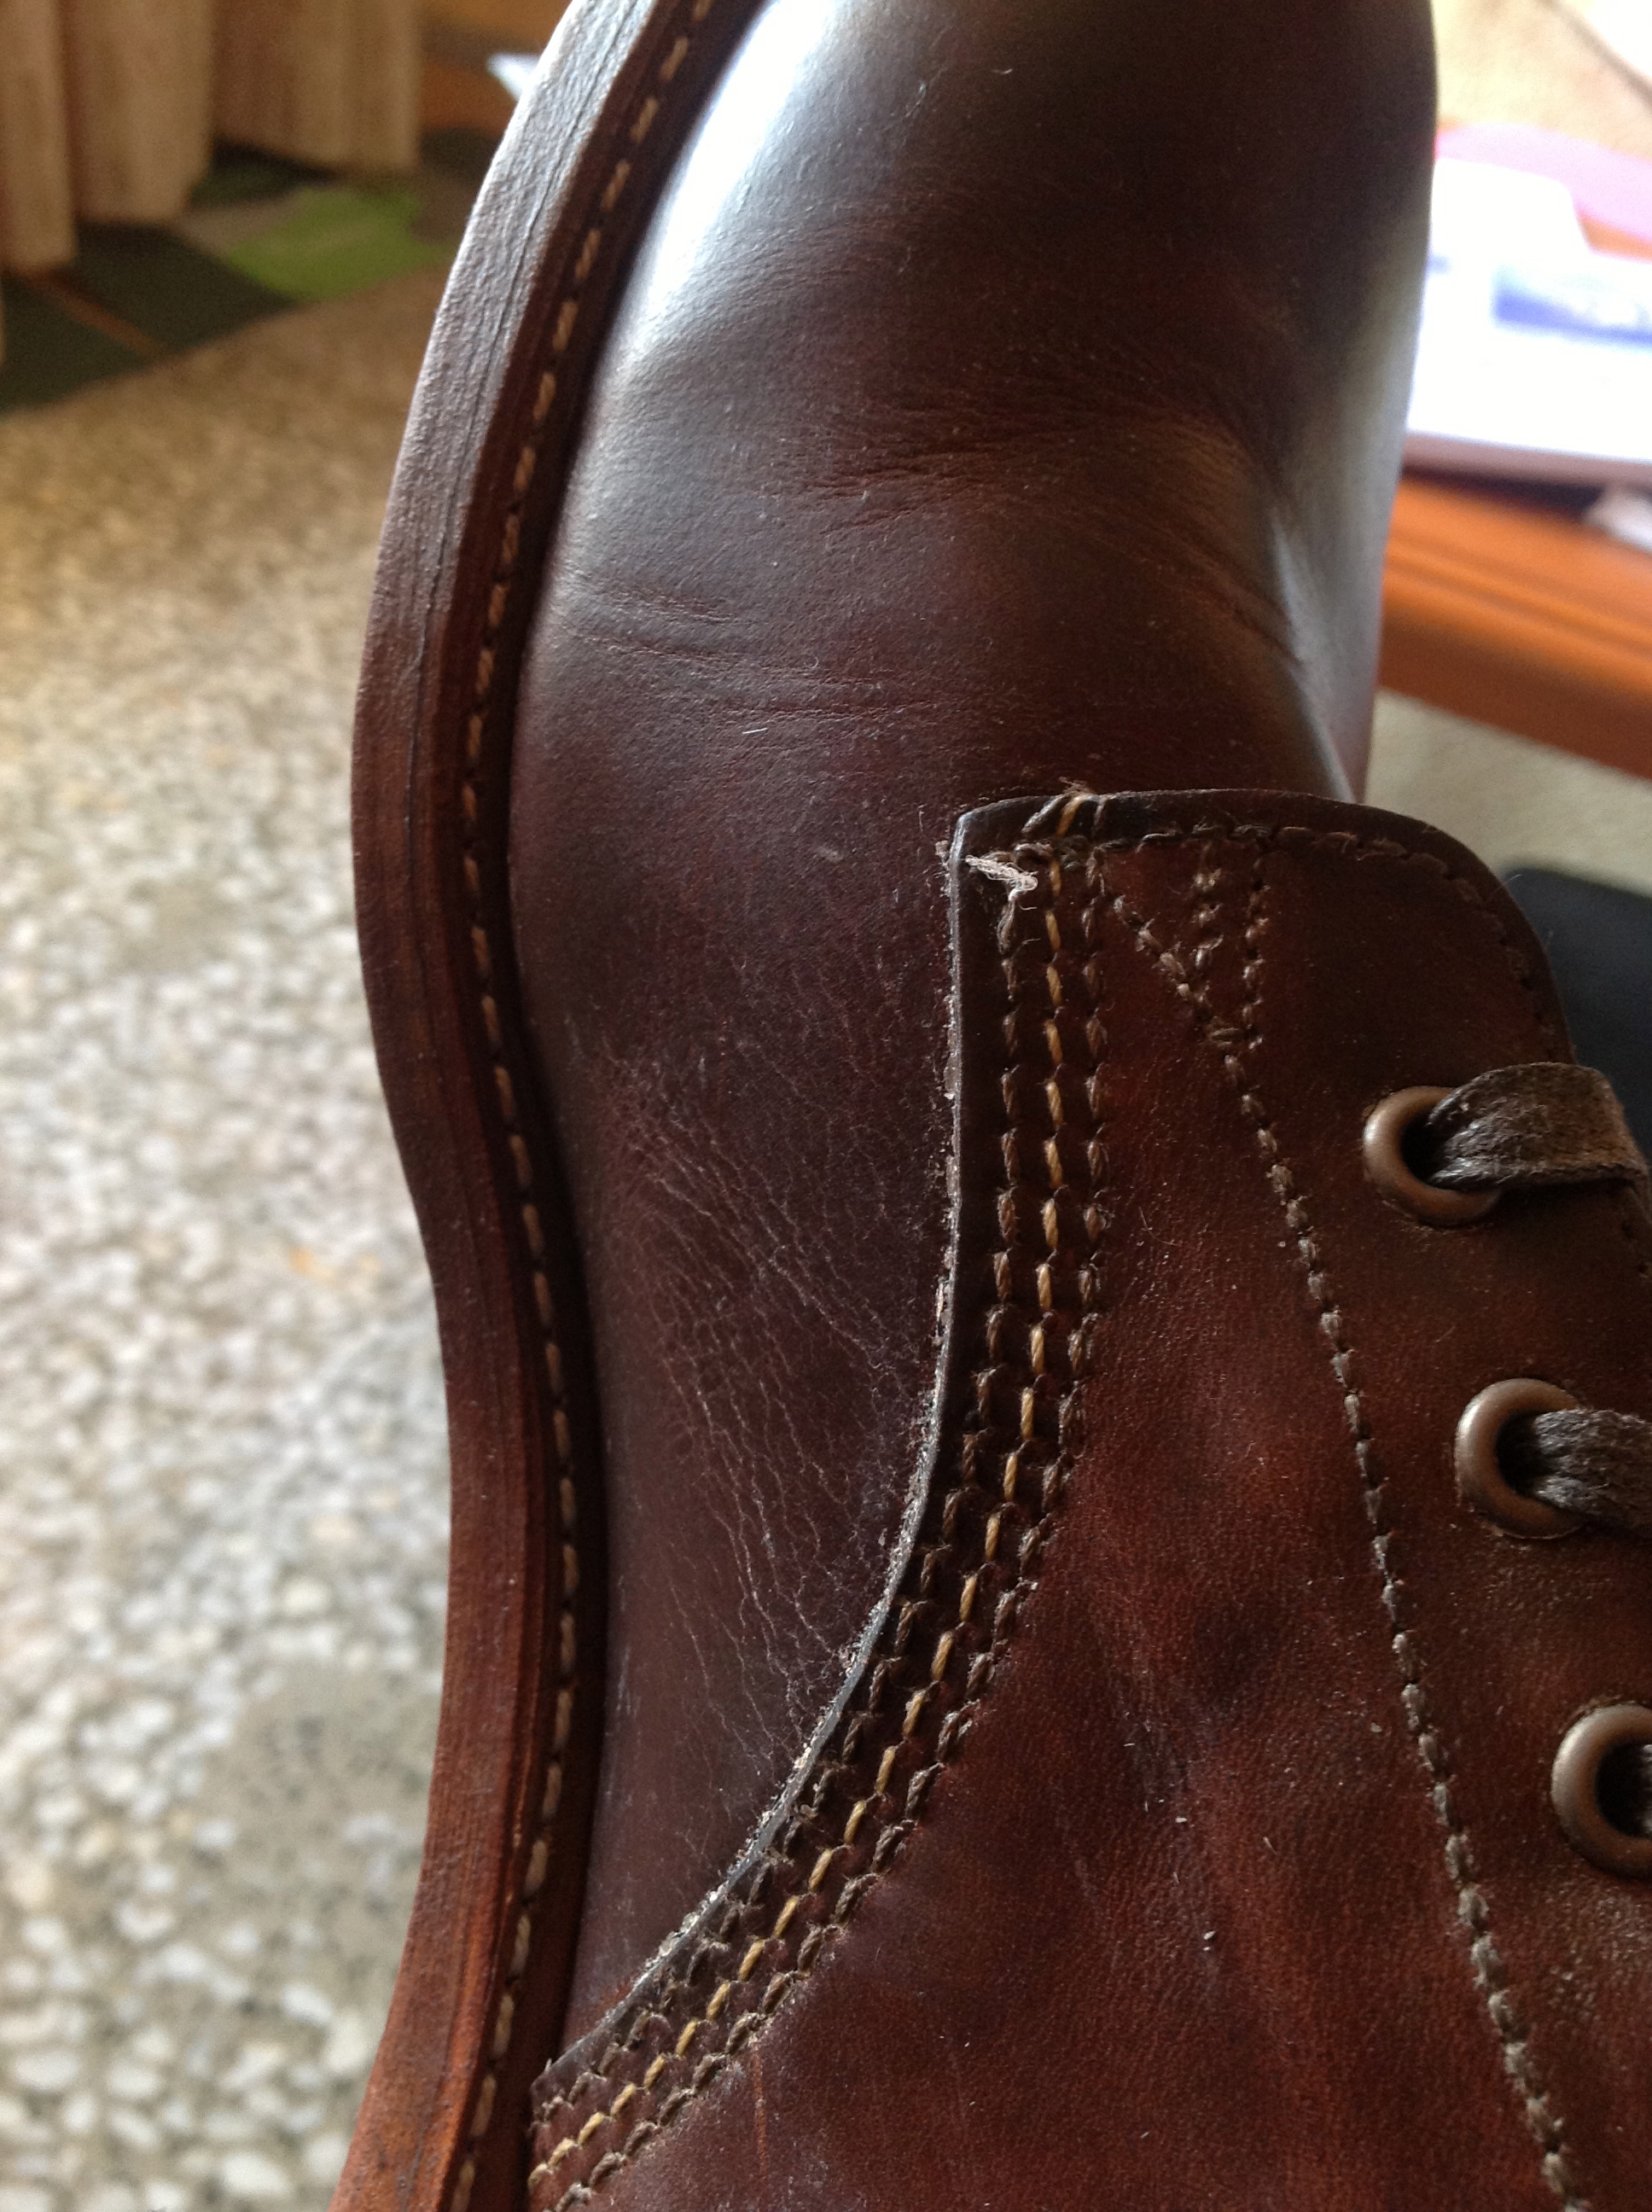 Wolverine 1000 Mile Boot Review | Page 217 | Styleforum